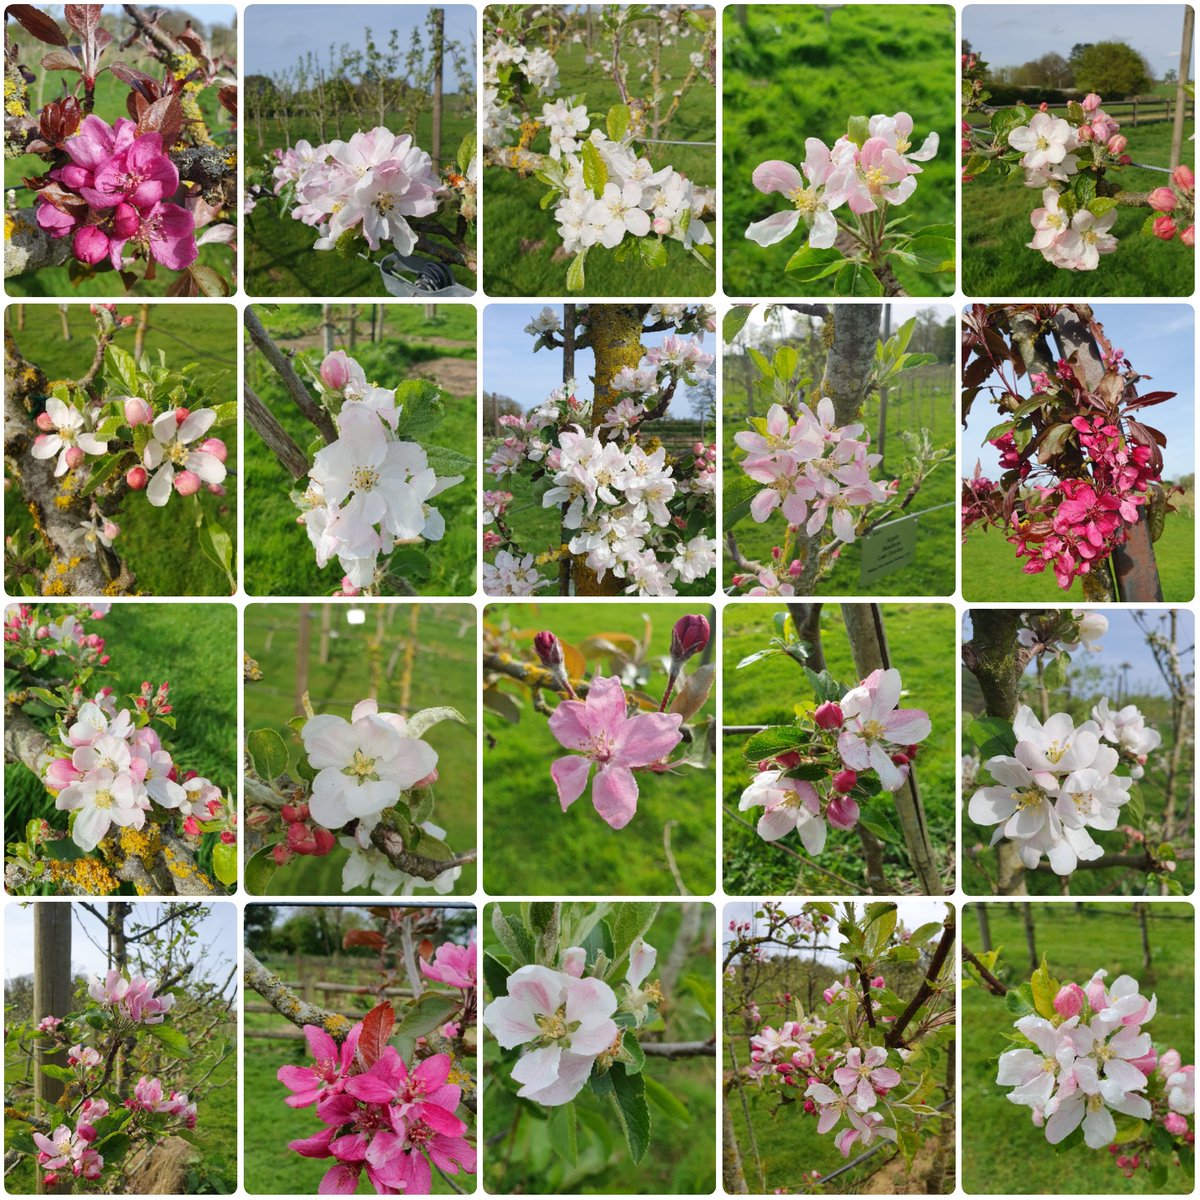 A huge perk of my job is being surrounded by Blossom for a few weeks. Looked how varied they can be!